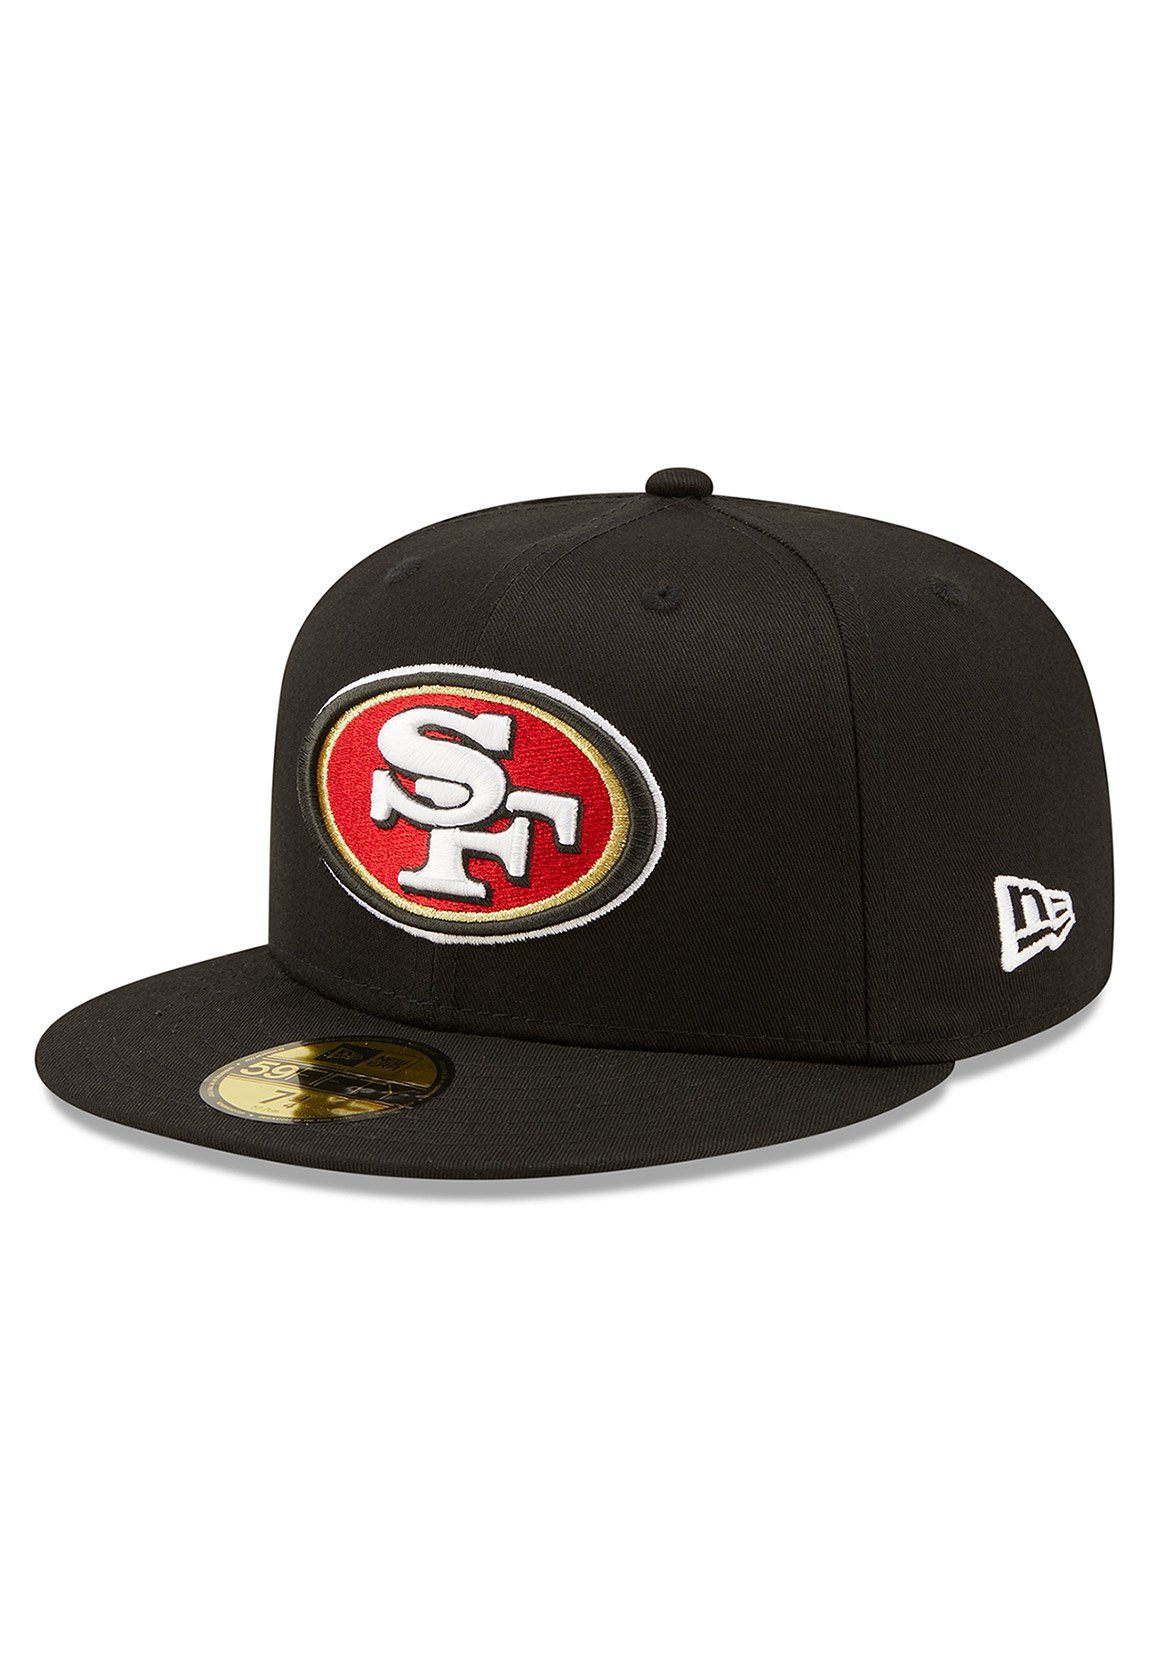 New Patch 49ers Cap Fitted Schwarz FRANCISCO Side 59Fifty New Era SAN